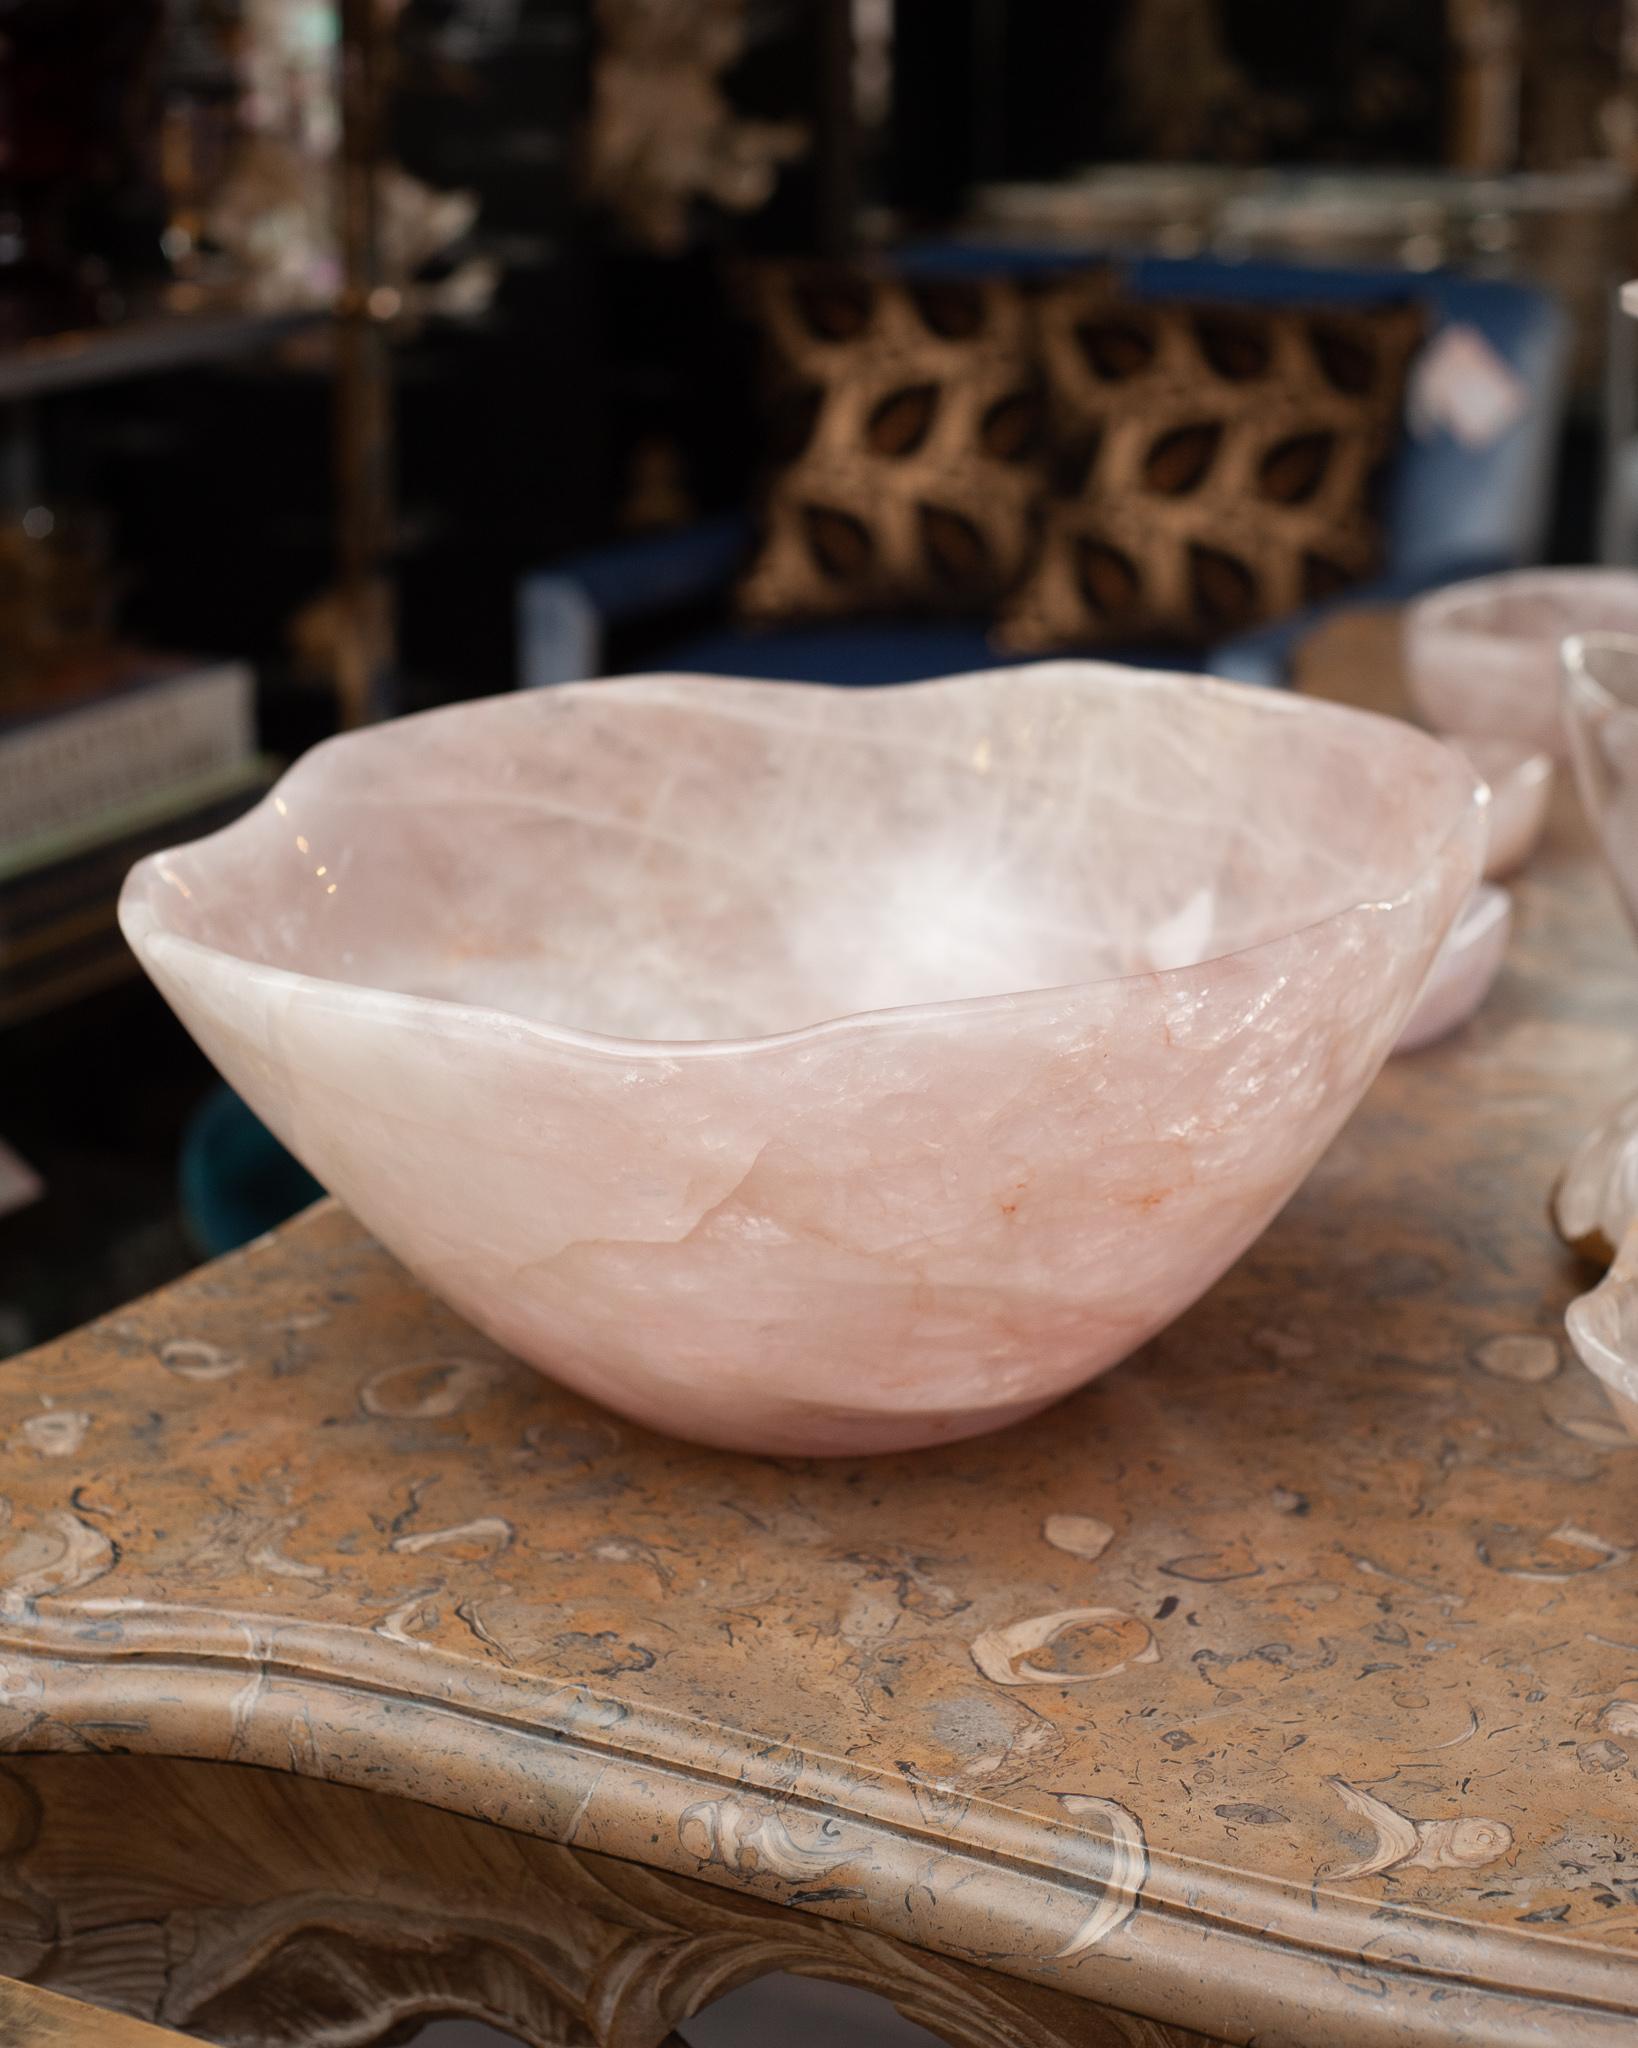 Bring the healing energy of rose quartz into your home with this beautiful large finely carved bowl. This substantial carved bowl can filled on a kitchen island or kept sculptural as an empty vessel and placed in any space. Rose quartz, the